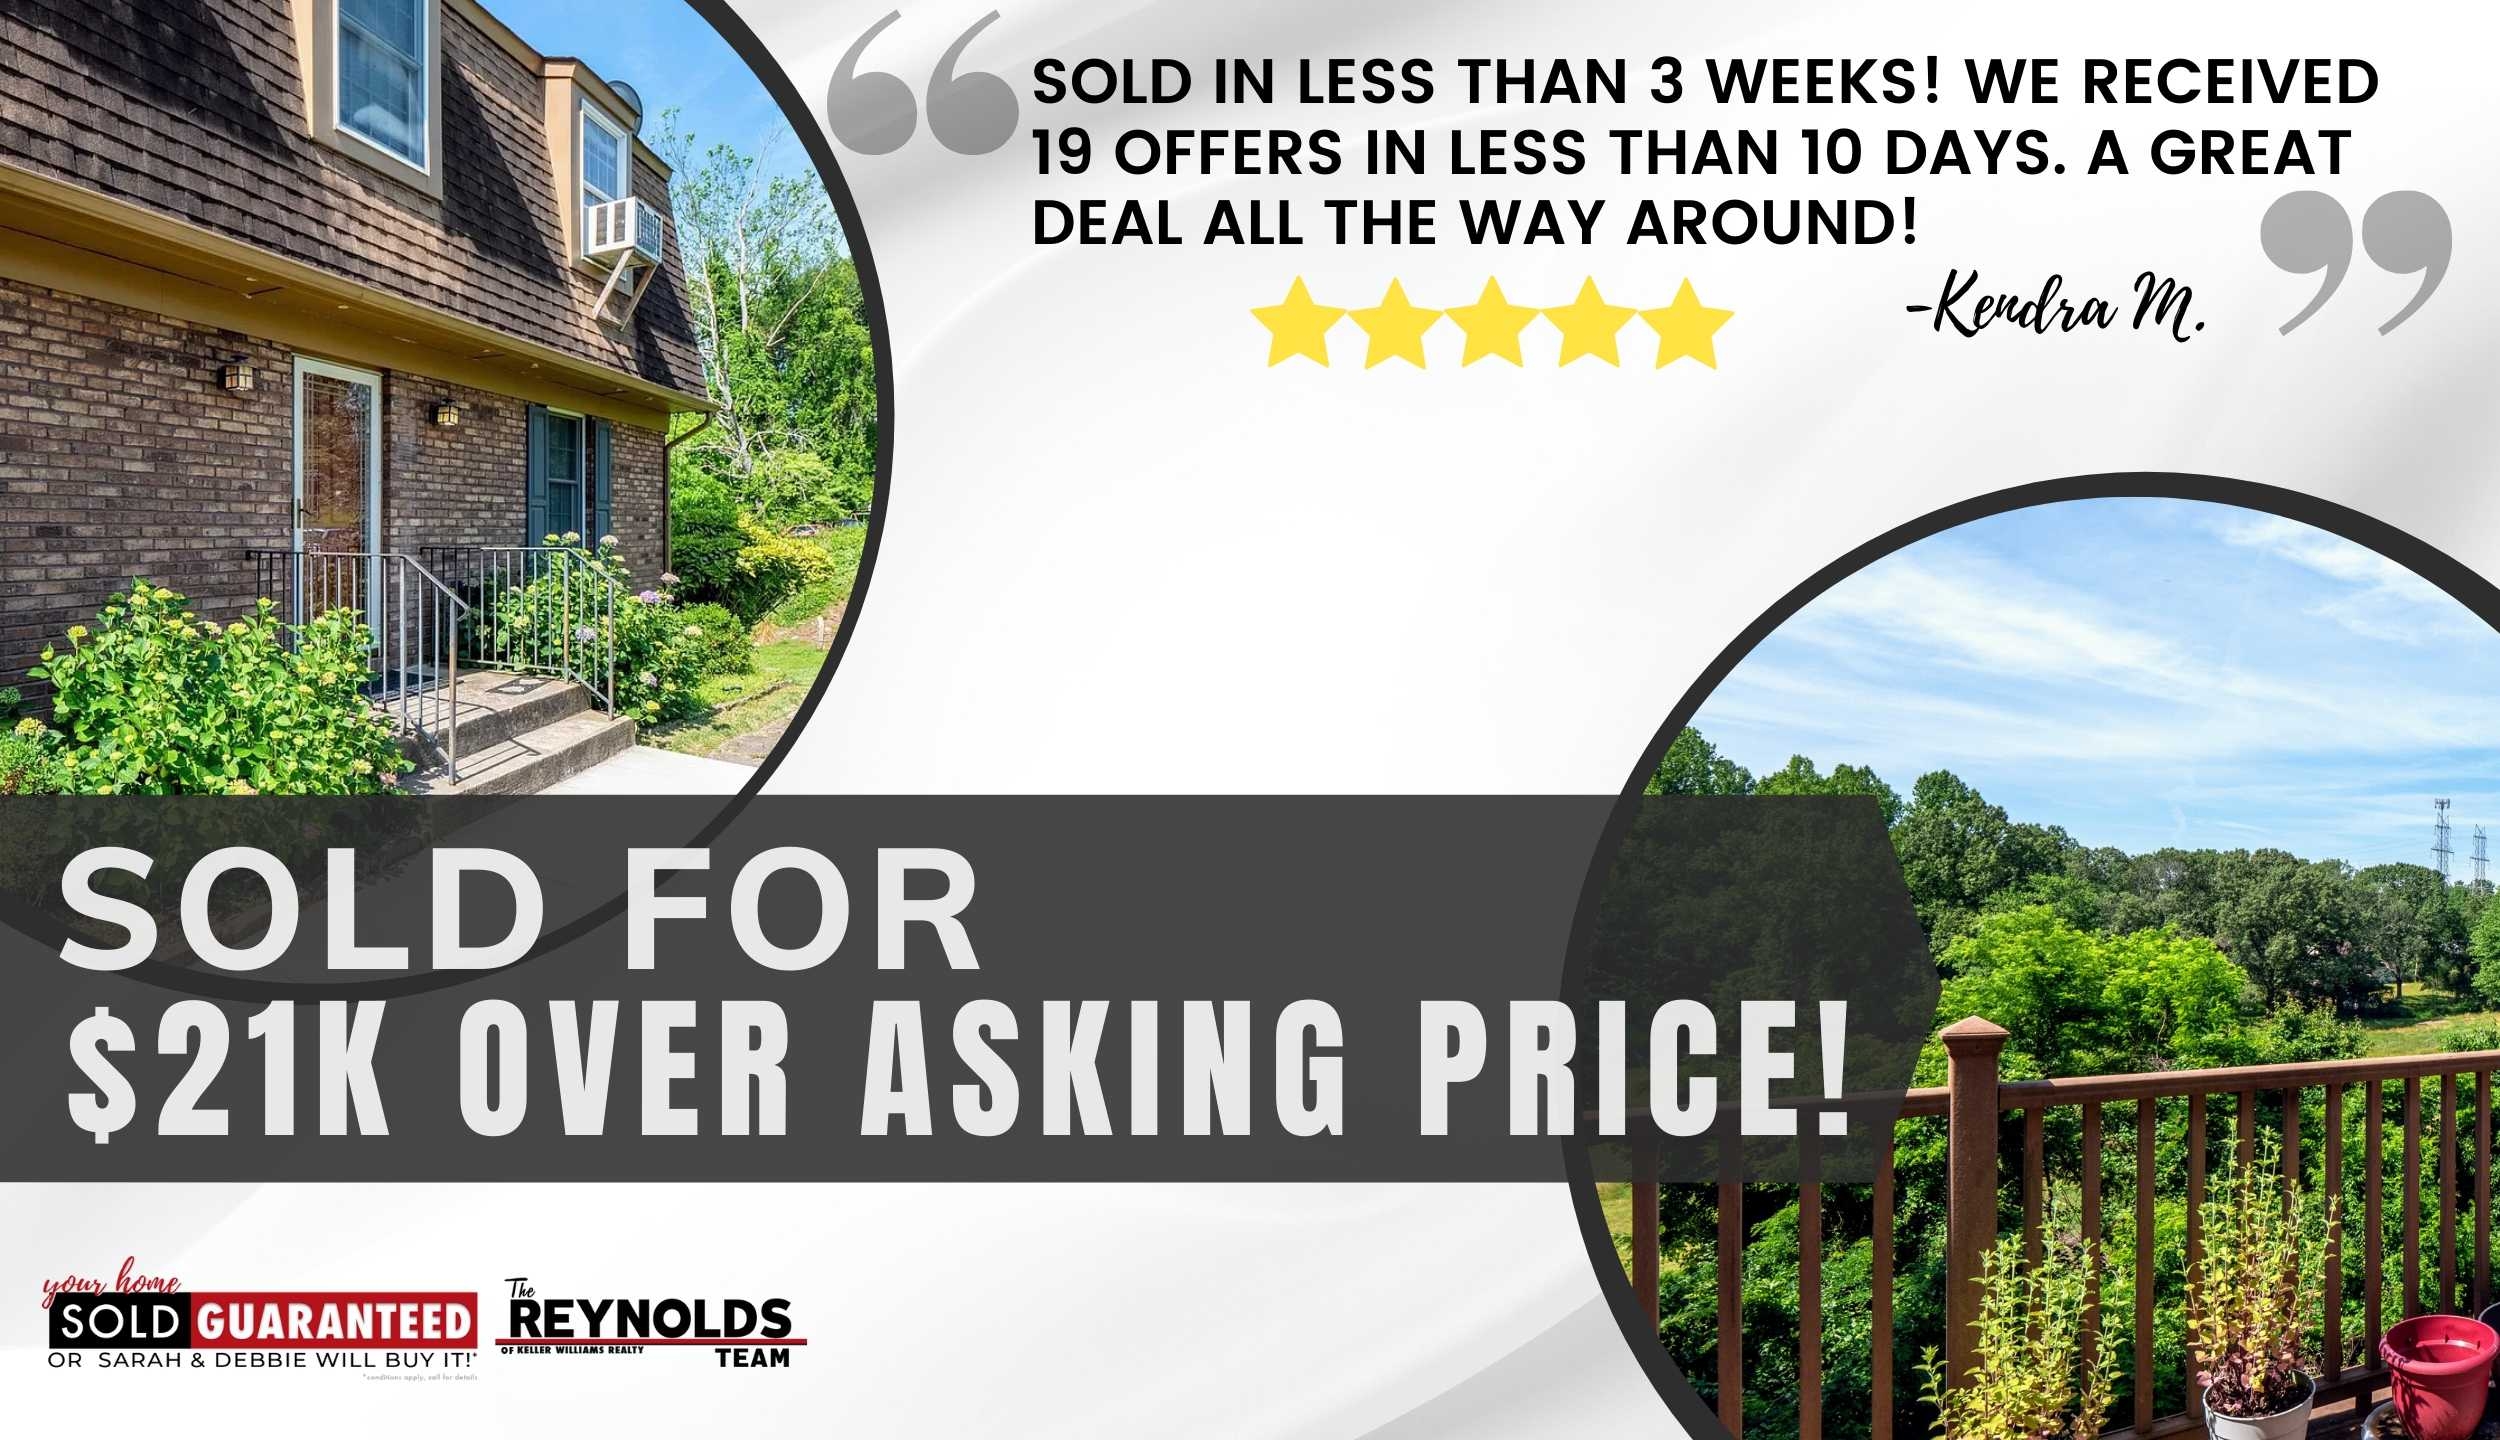 We SOLD This Home In Upper Marlboro, MD “As-Is” For $21K OVER ASKING PRICE!